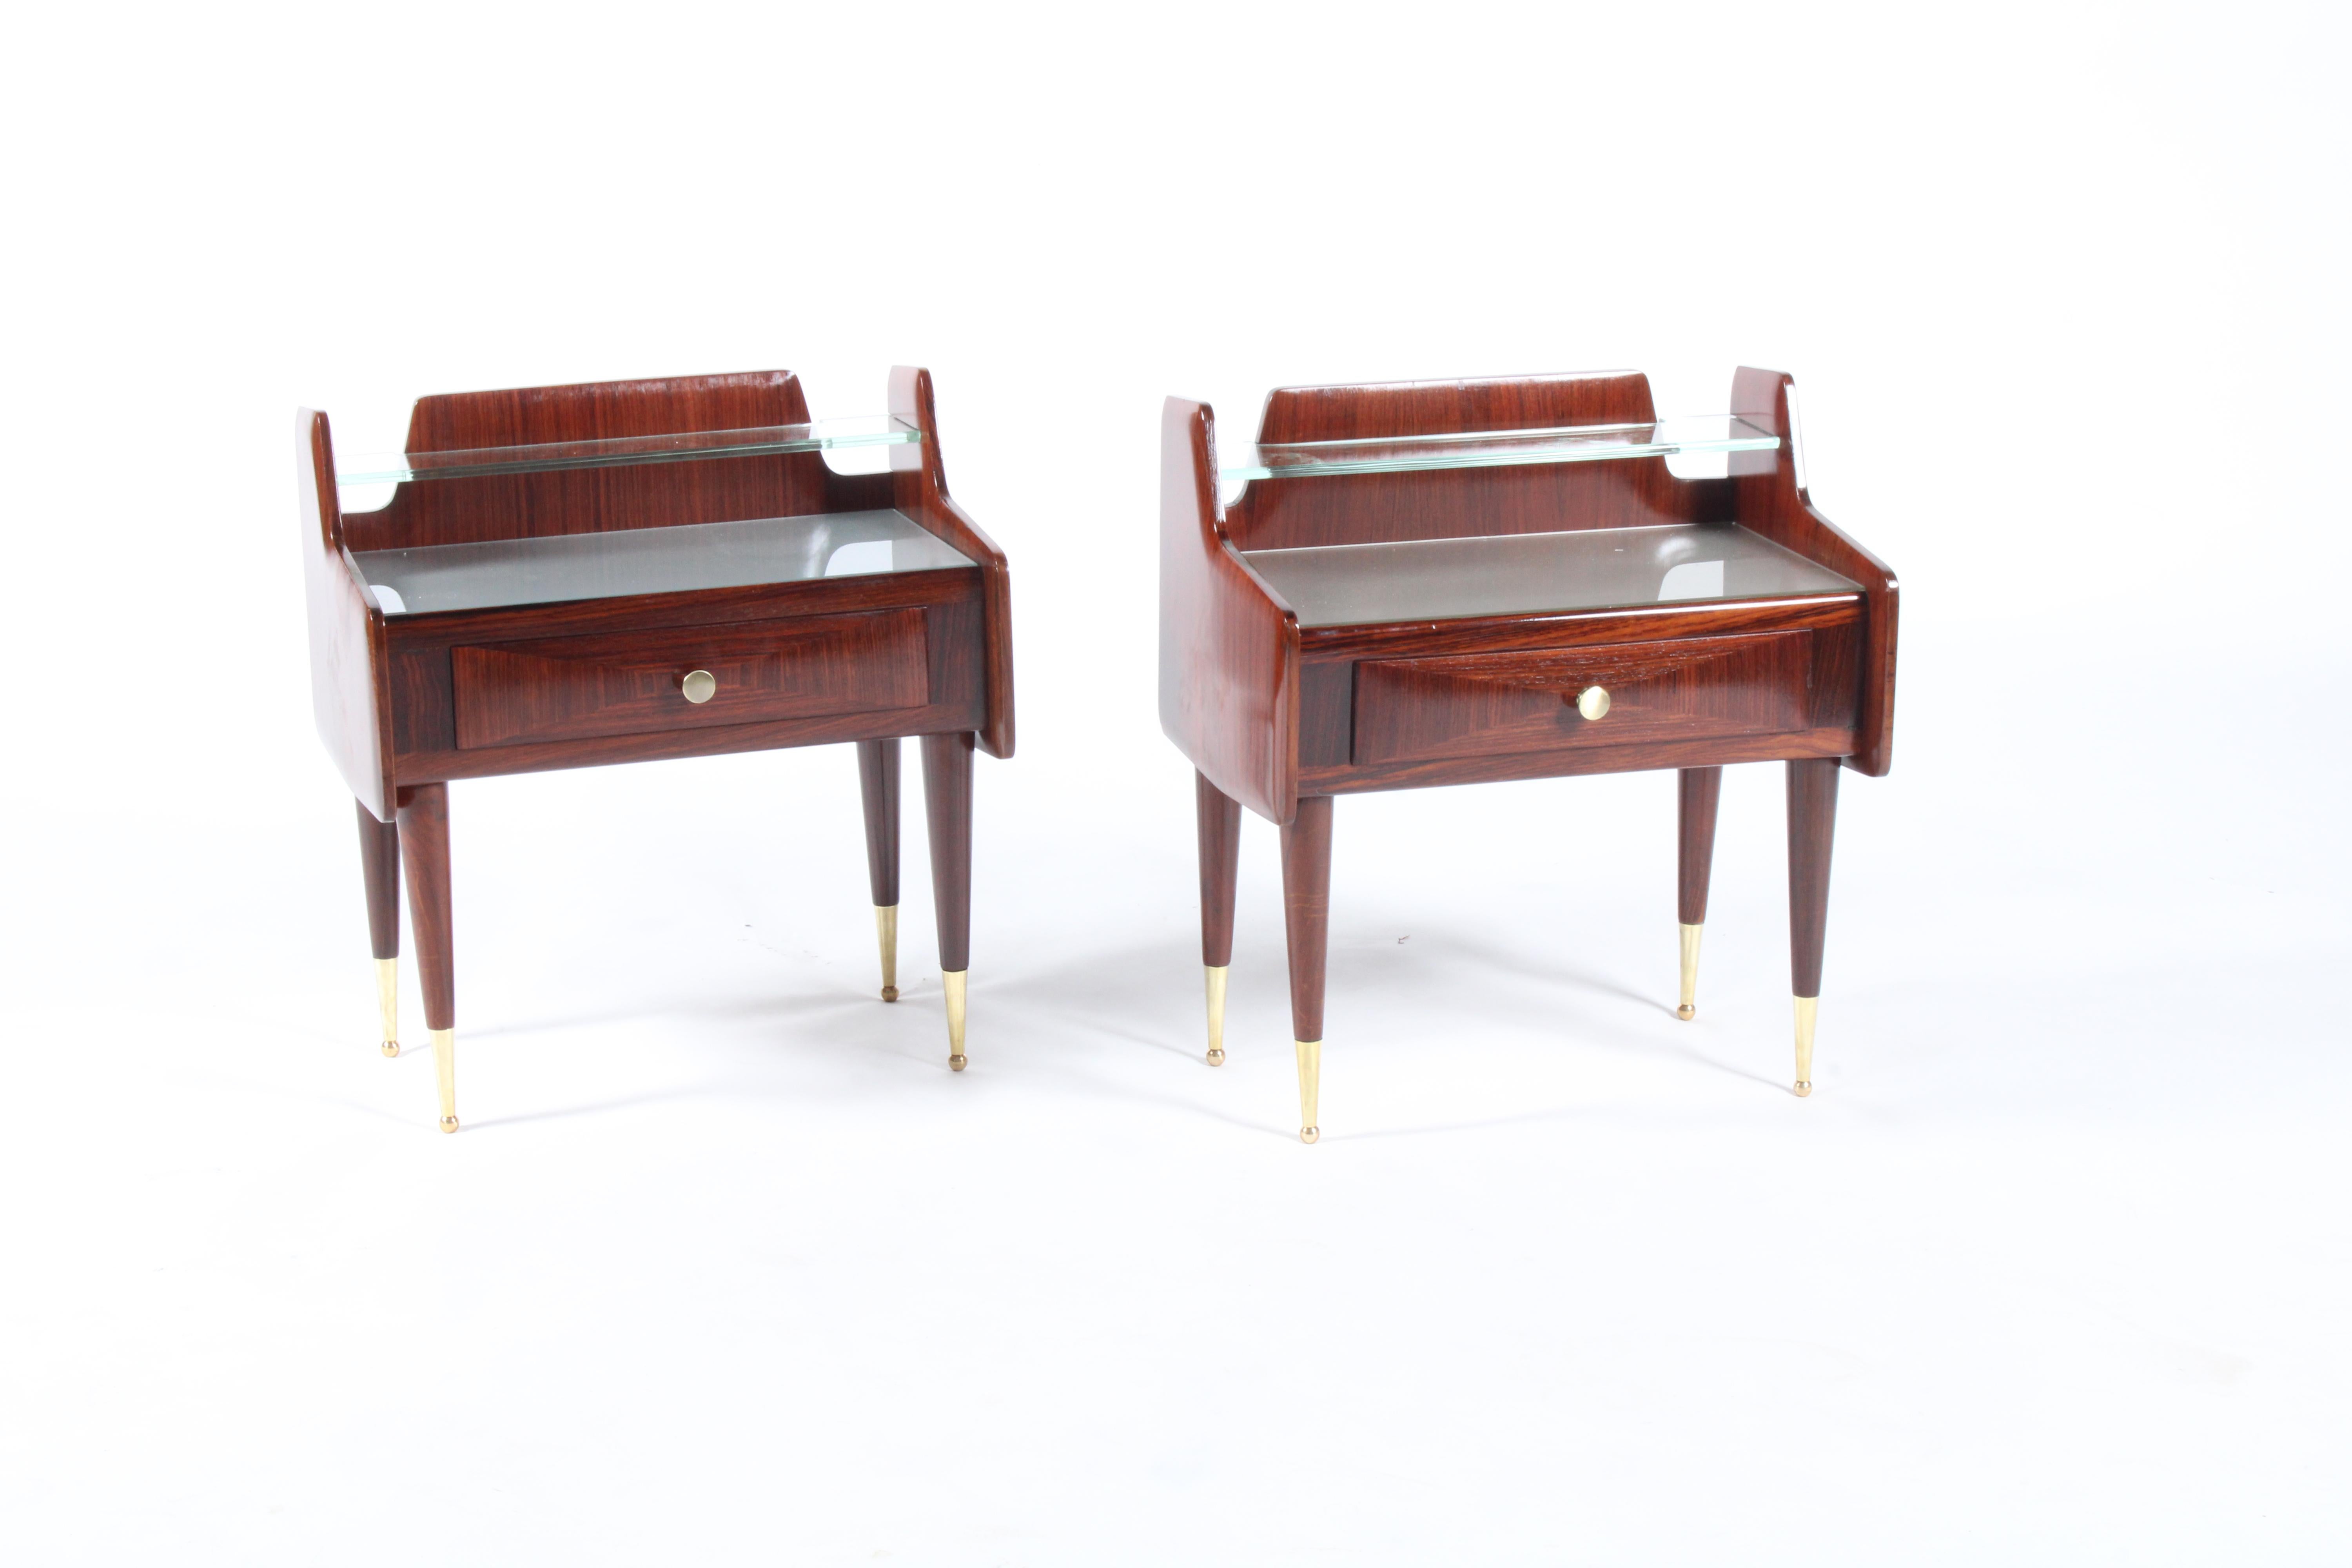 Stunning pair of original mid century Italian night stands, with exquisite grain pattern and a rich color this set will look amazing in a wide range of different bedroom styles. Sourced directly from a private collection in Milan we also have the